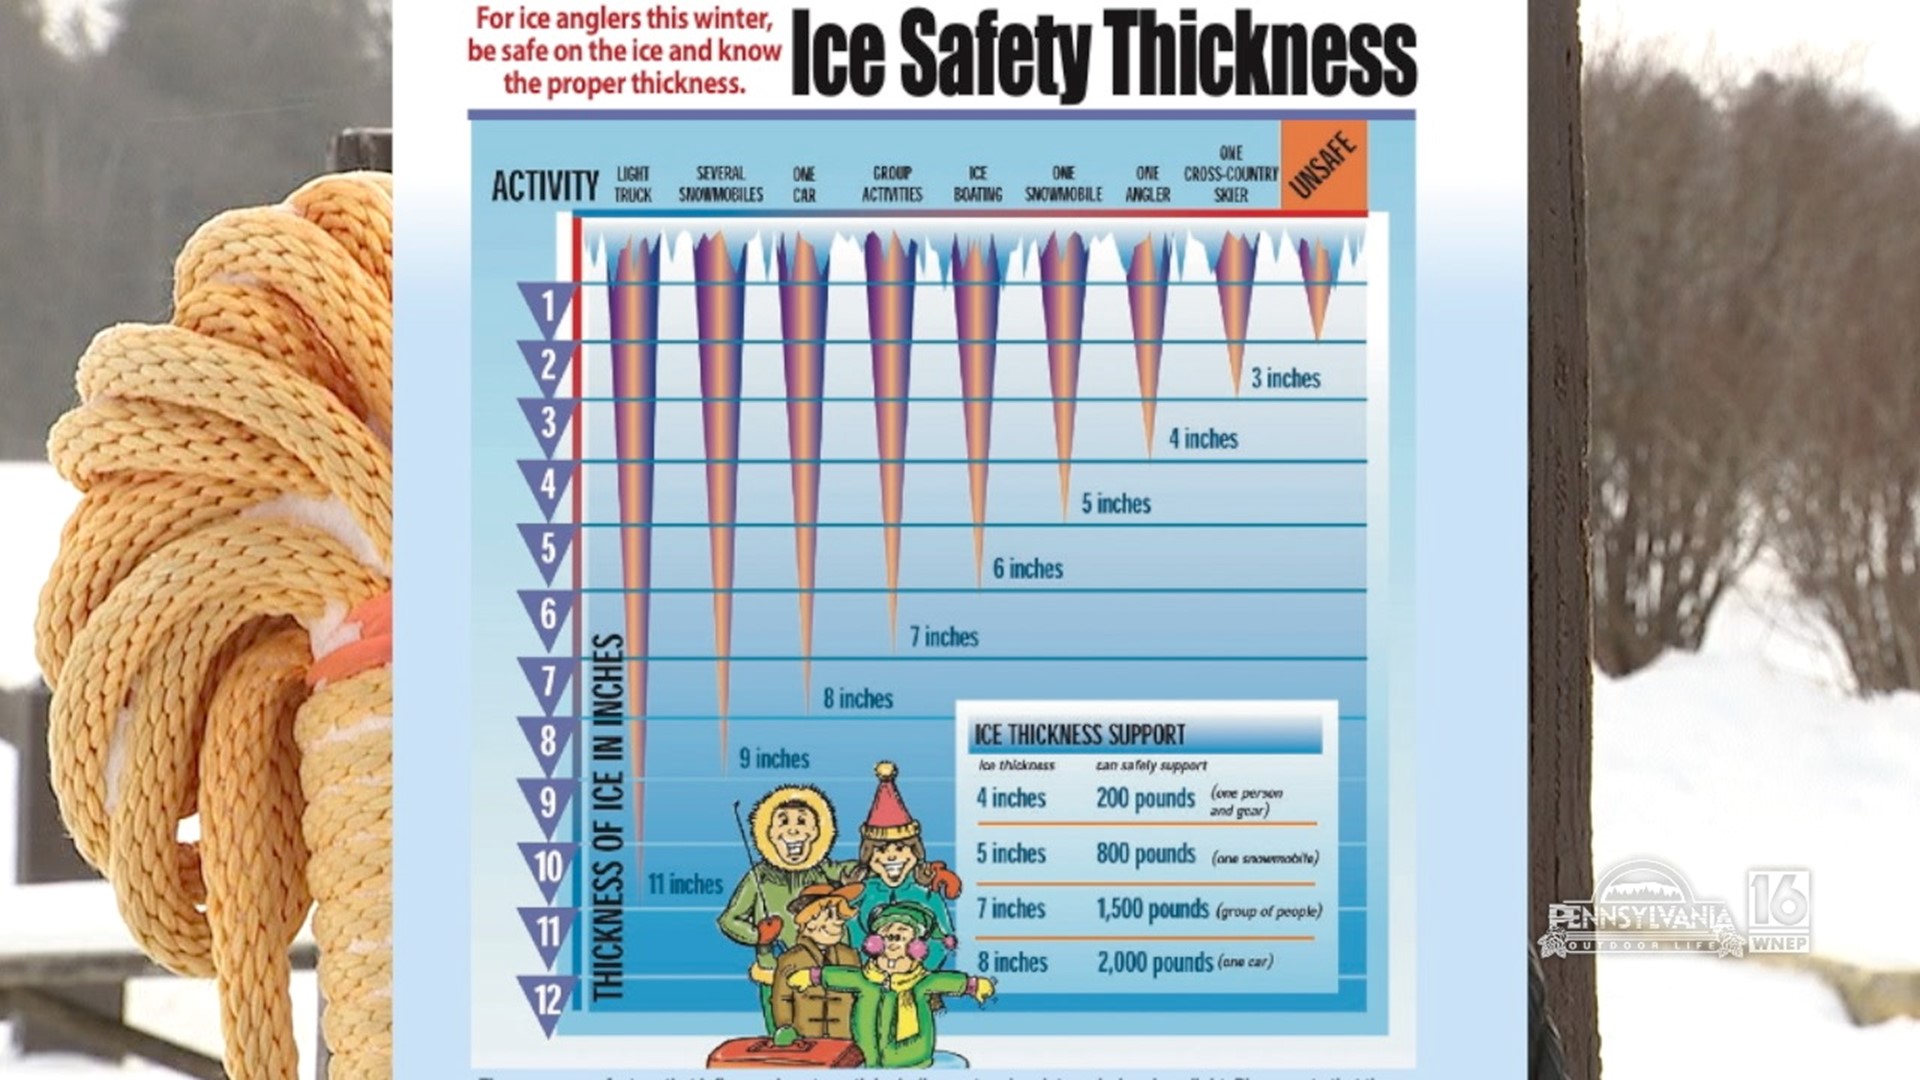 Stay Safe on the Ice!